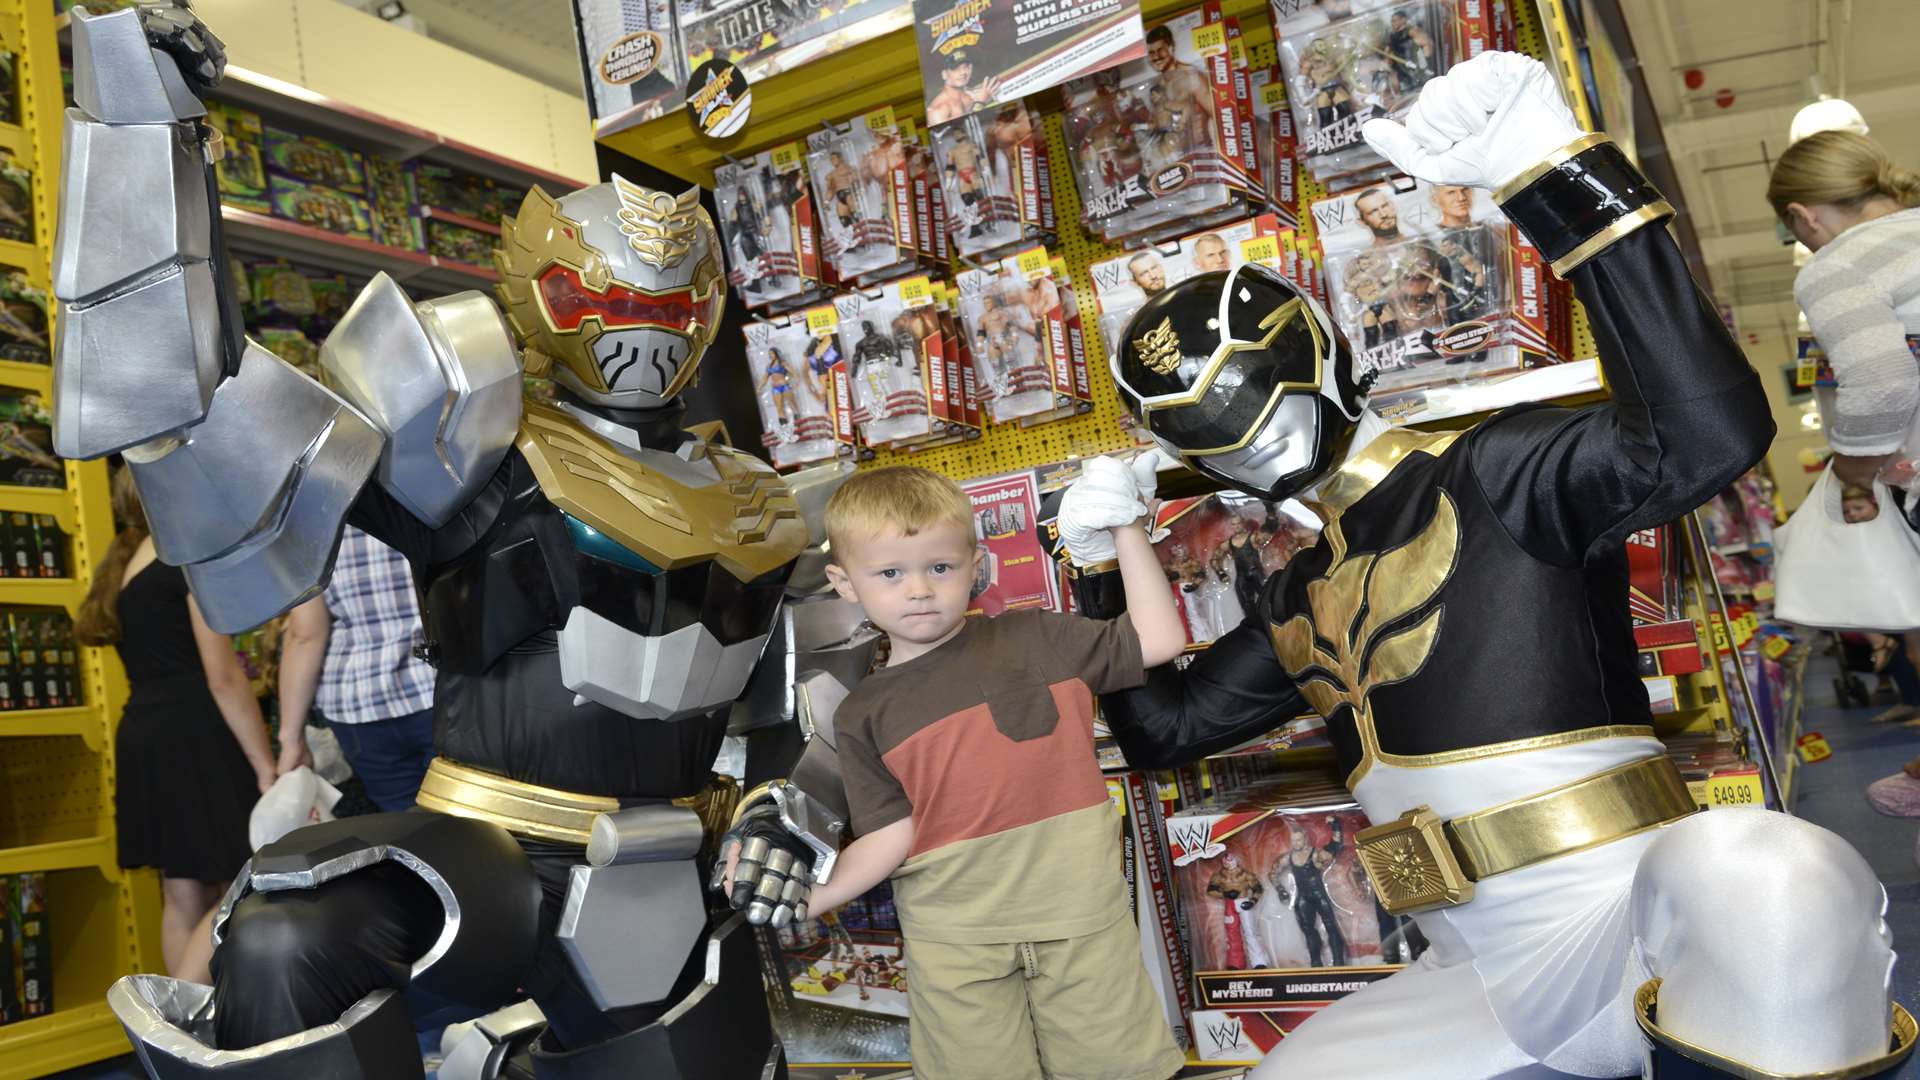 Kye George met Power Rangers at the Smyths store in 2013.